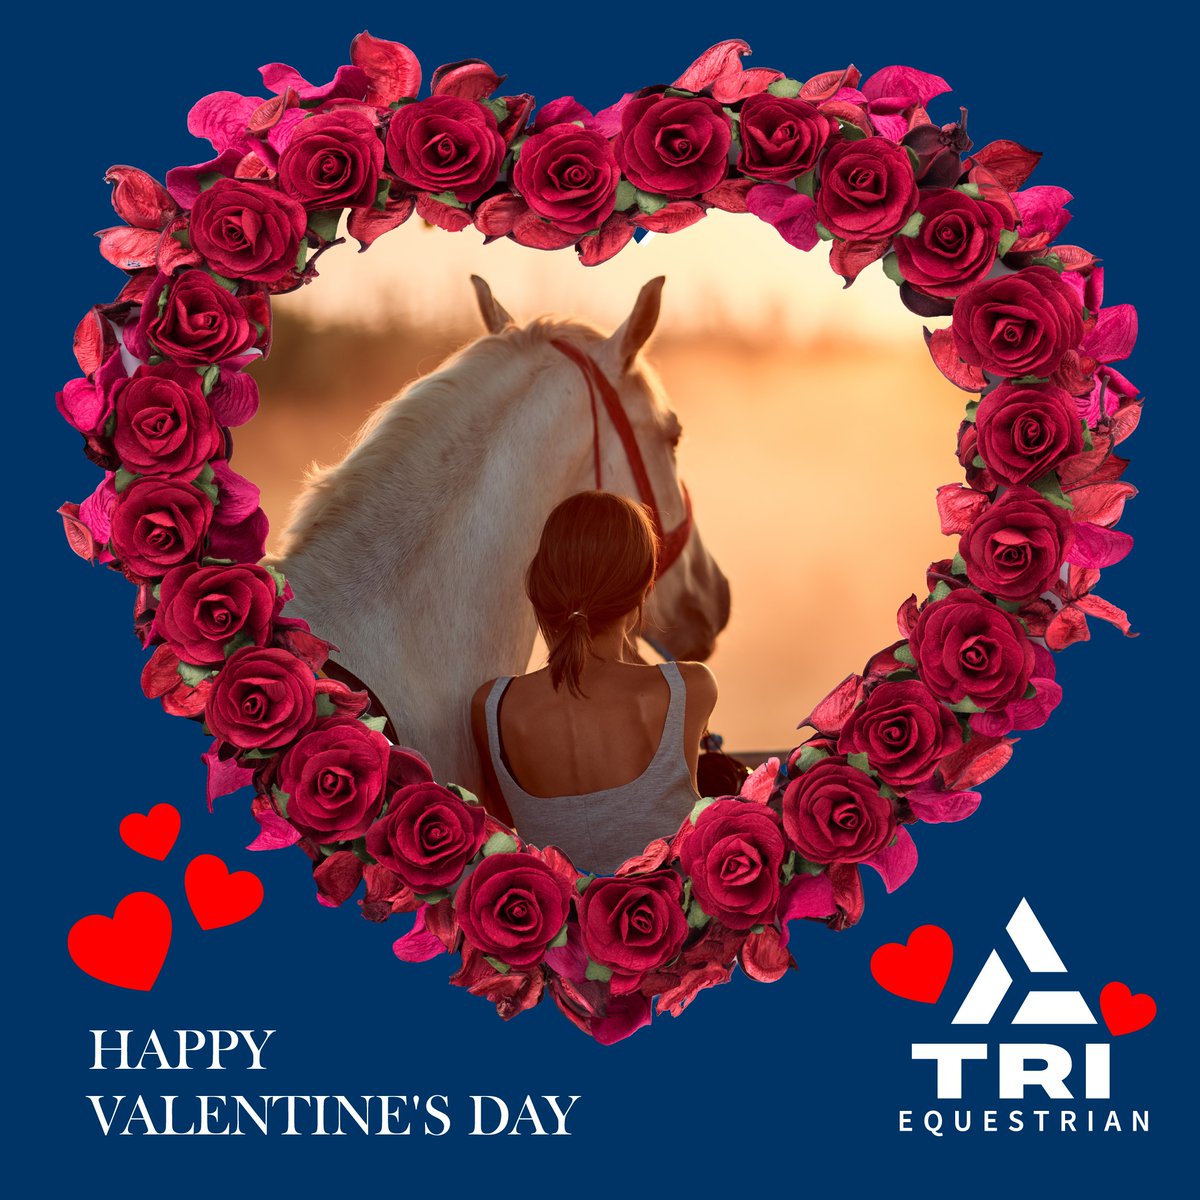 💕 Happy Valentine's Day to all you amazing equestrians out there! 💕🐴Sending lots of love your way on this day of romance and appreciation! 💖 #ValentinesDay #Equestrians #HorseLovers #LoveIsInTheAir #triequestrian